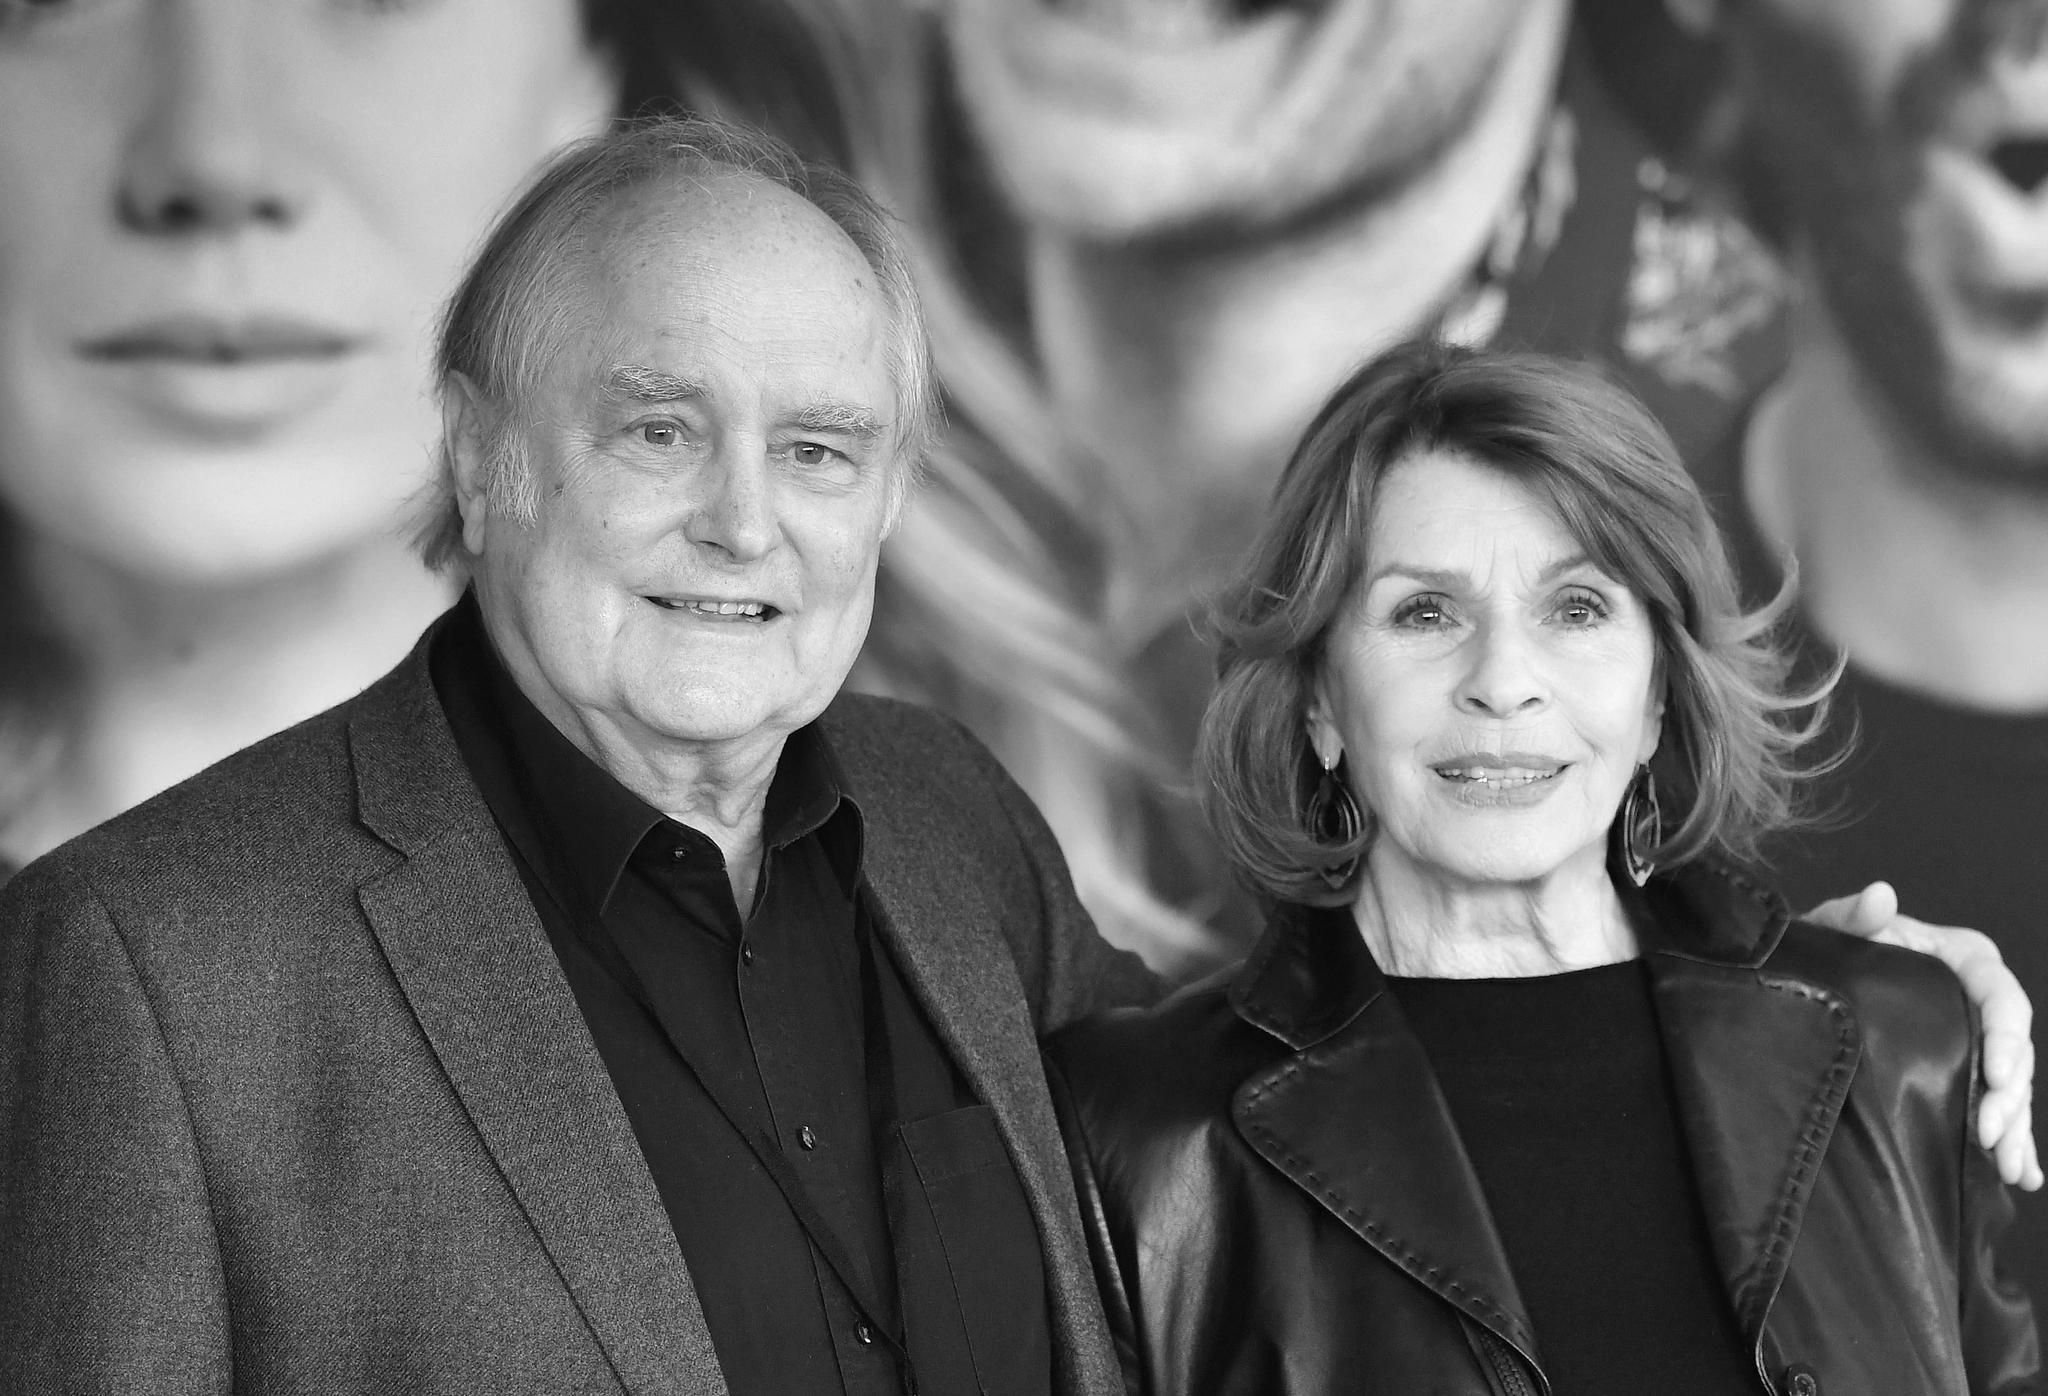 Senta Berger mourns the loss of great love